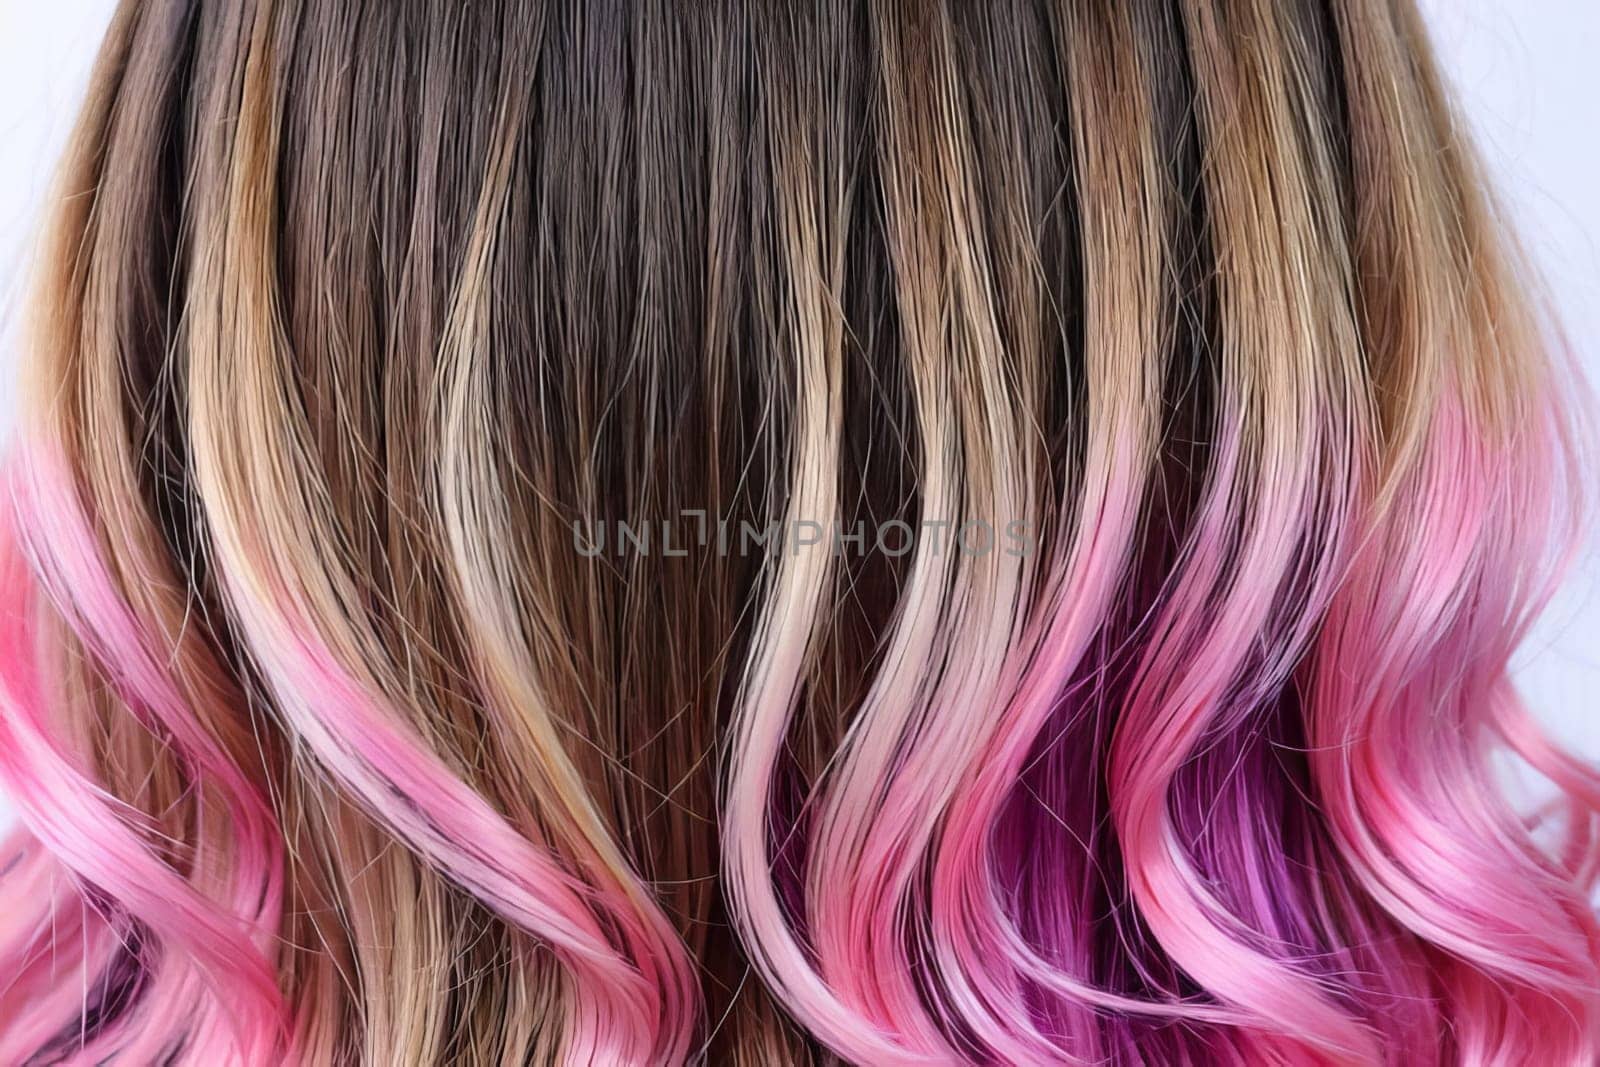 A mesmerizing close-up photo capturing the ombre elegance of beautiful pink hair, showcasing a seamless blend of delicate hues and tones. by Annu1tochka